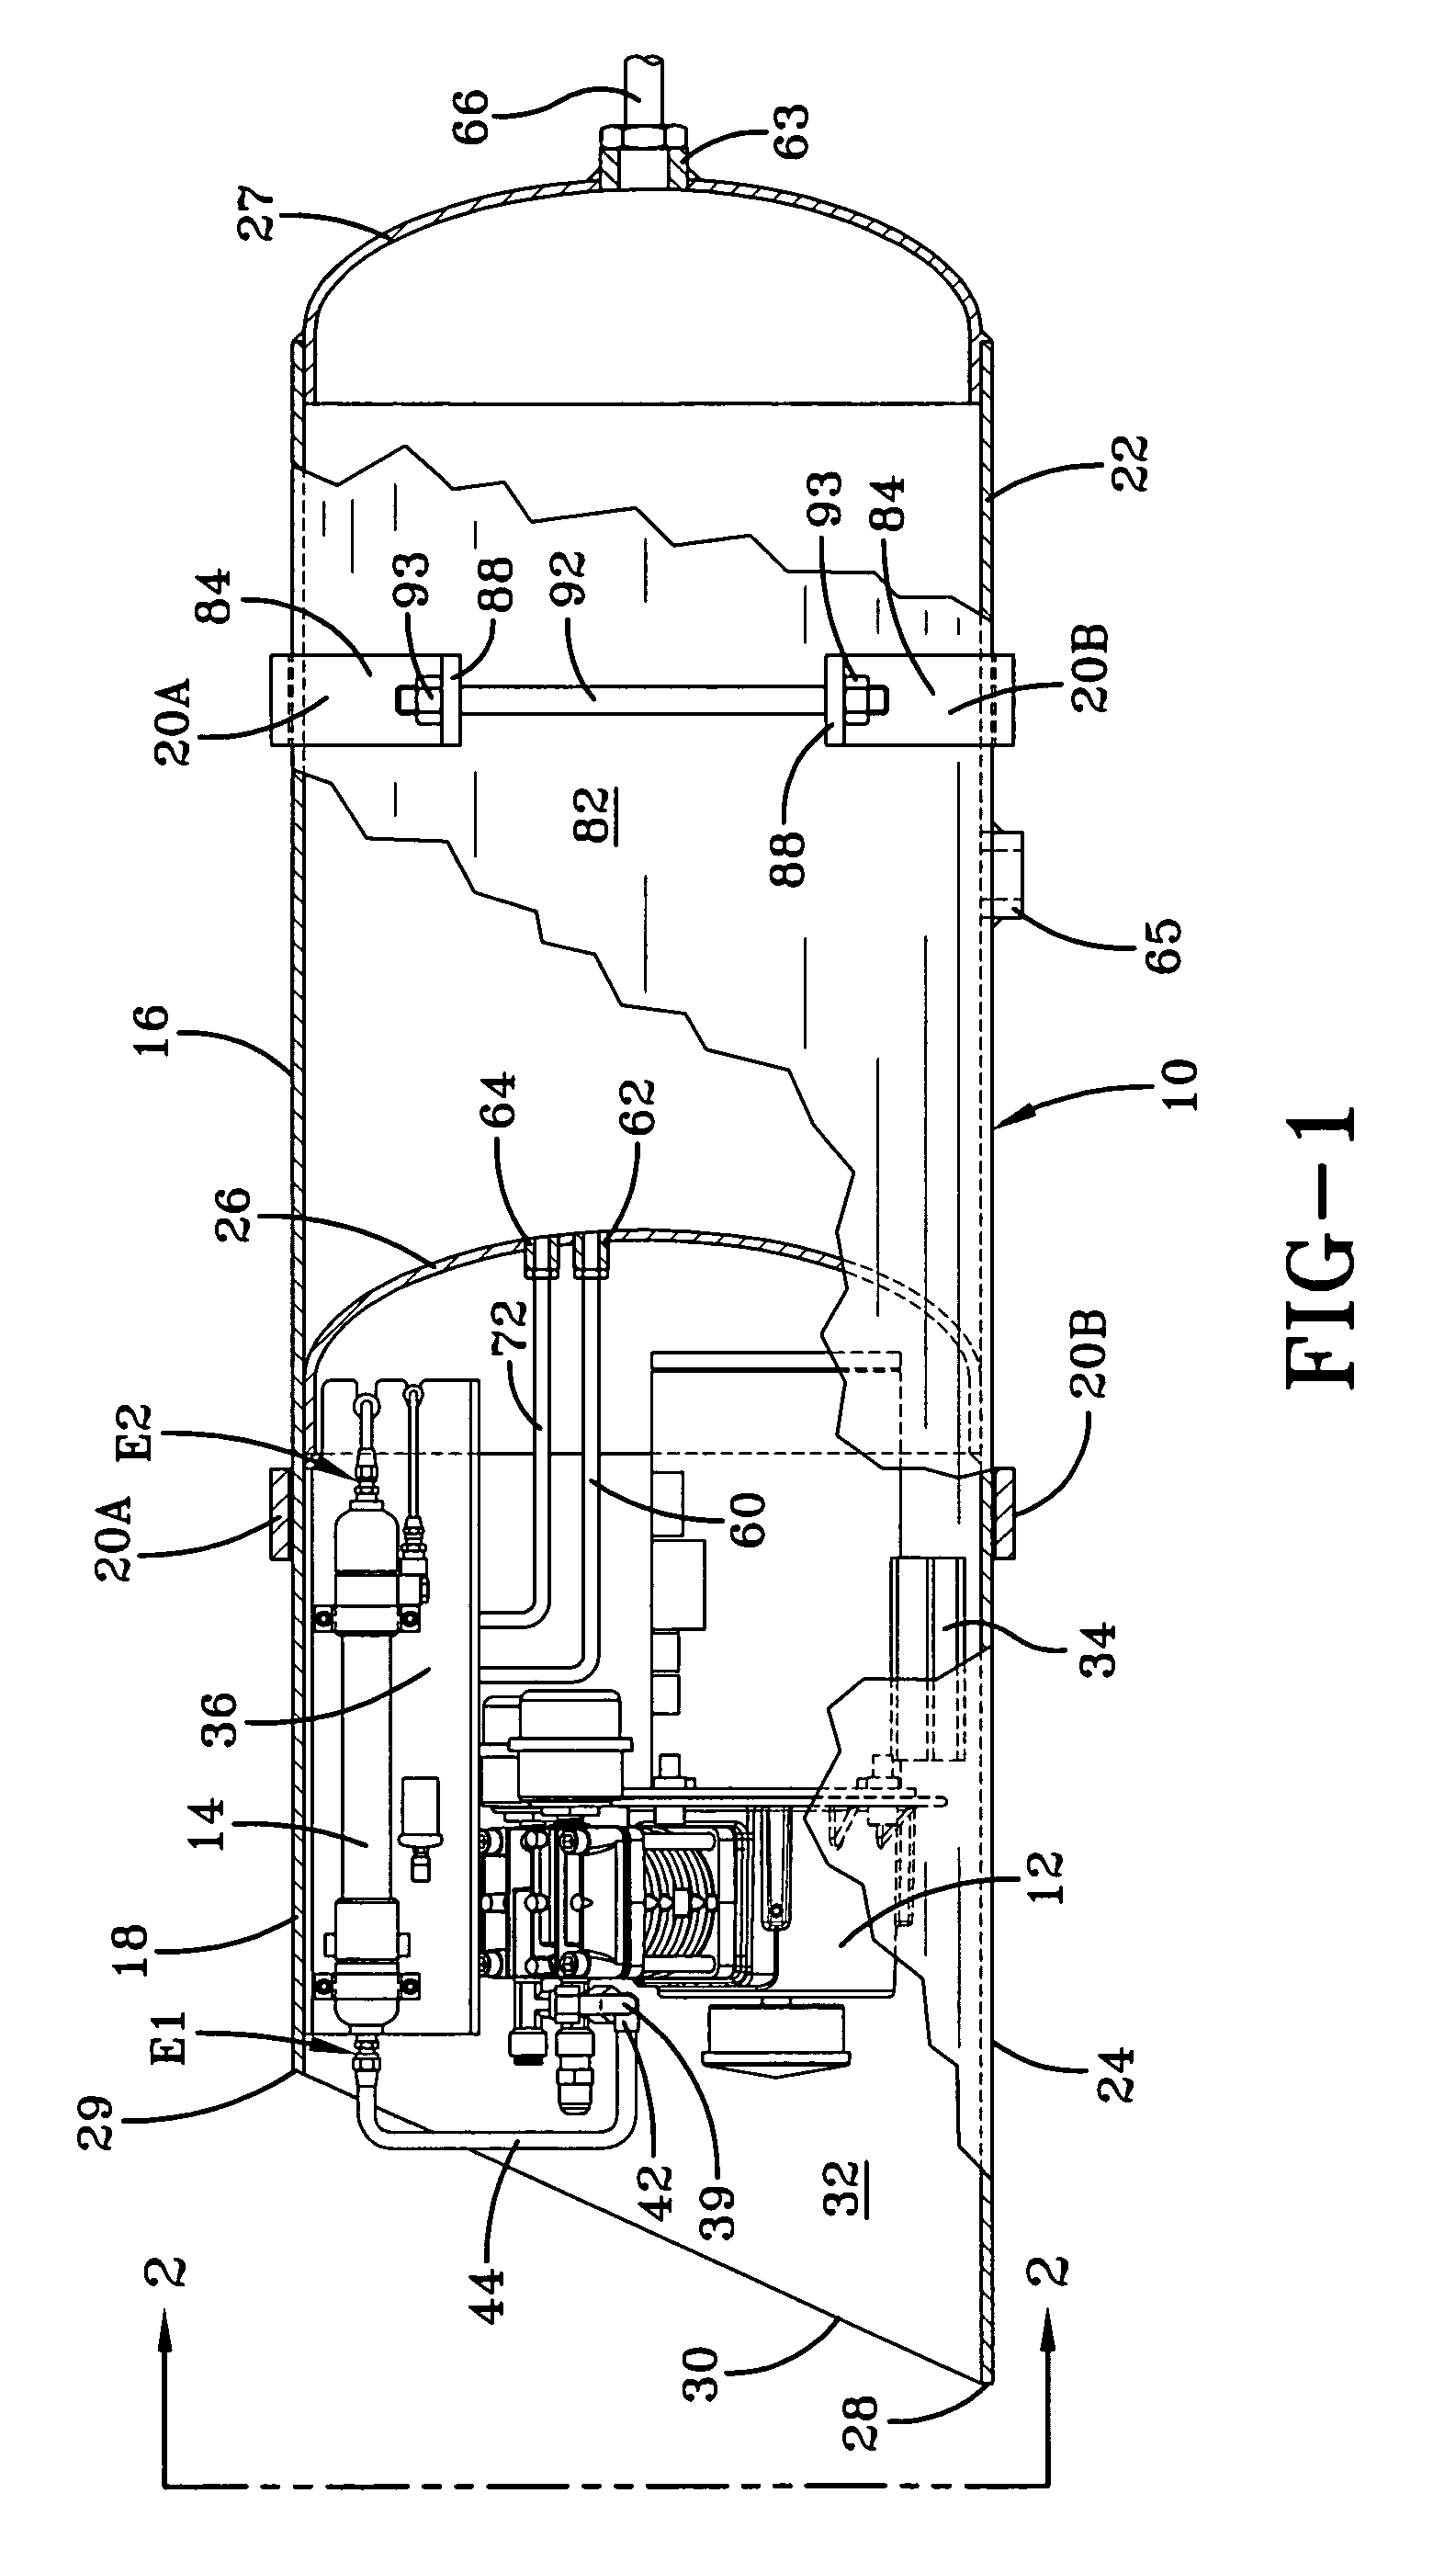 Dry compressed air supply module